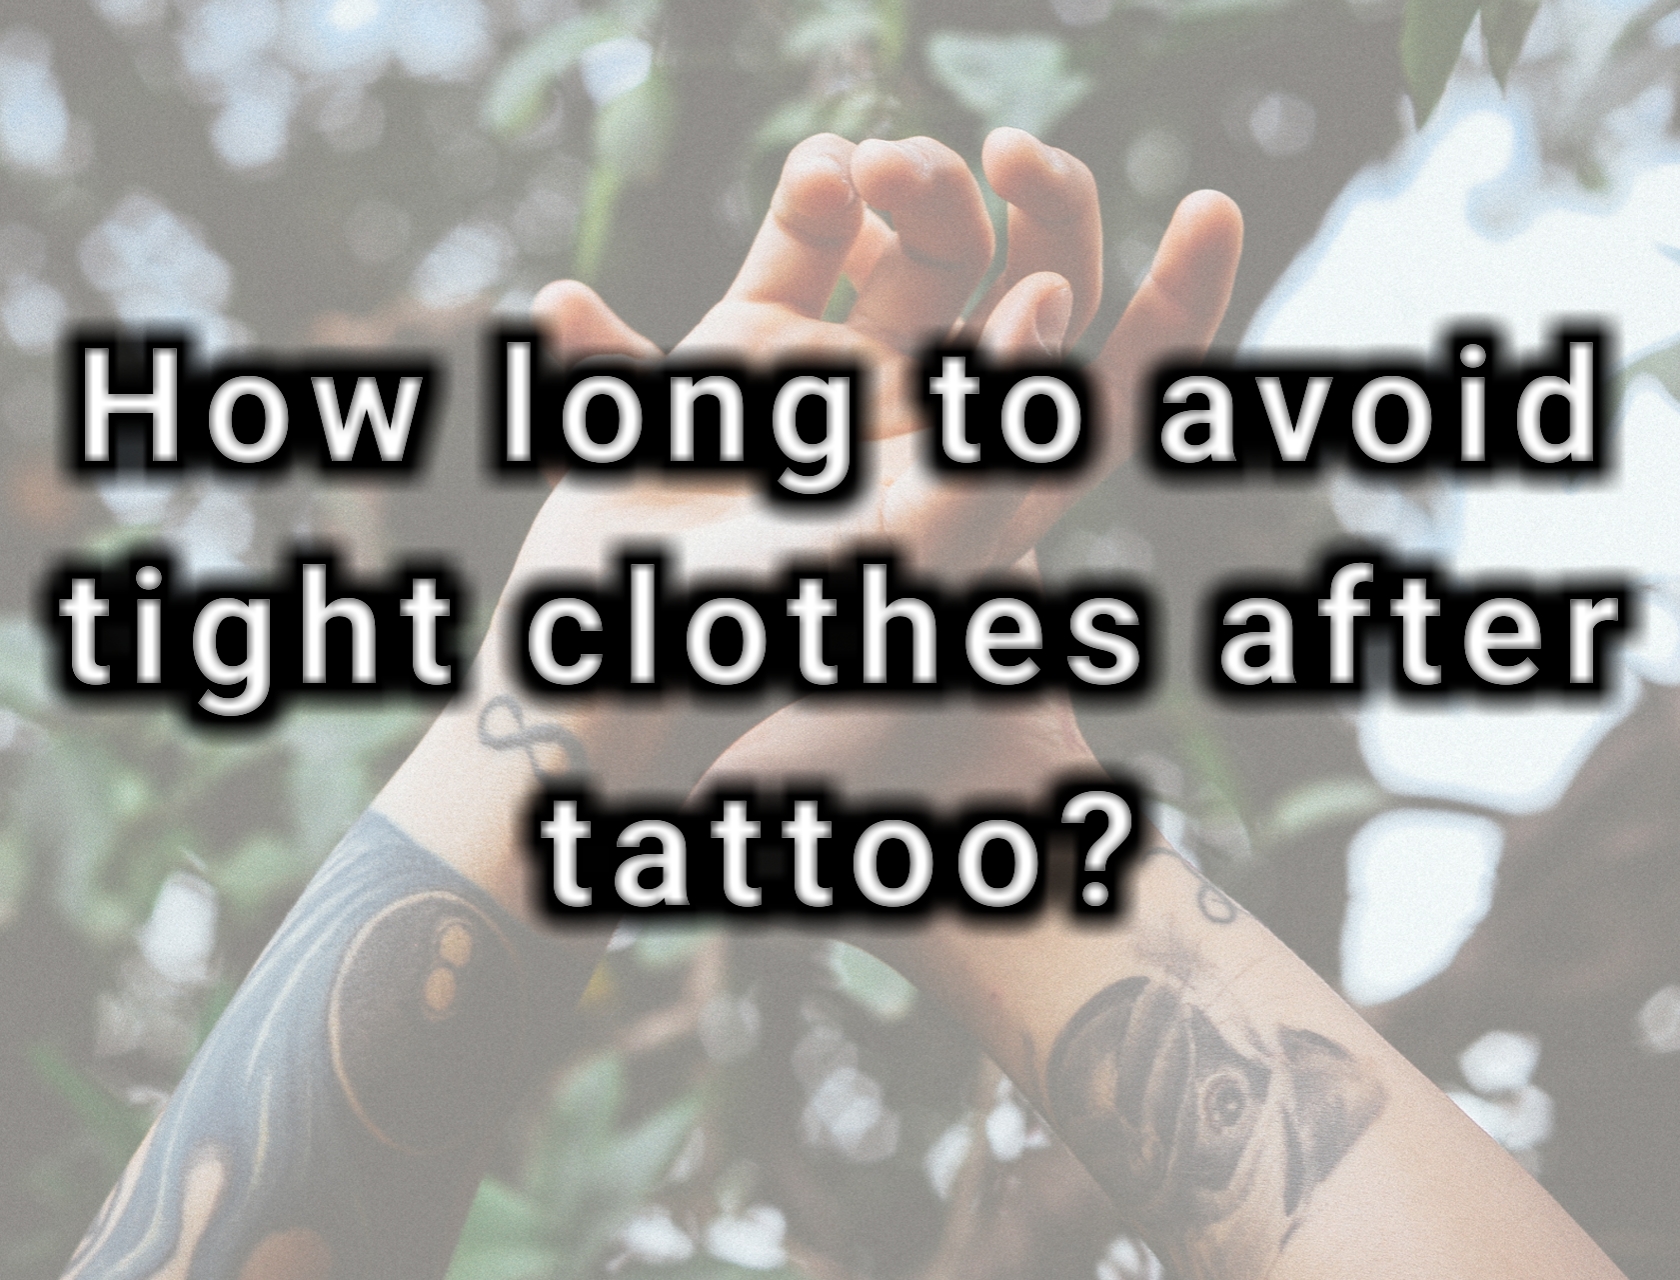 How long to avoid tight clothes after tattoo